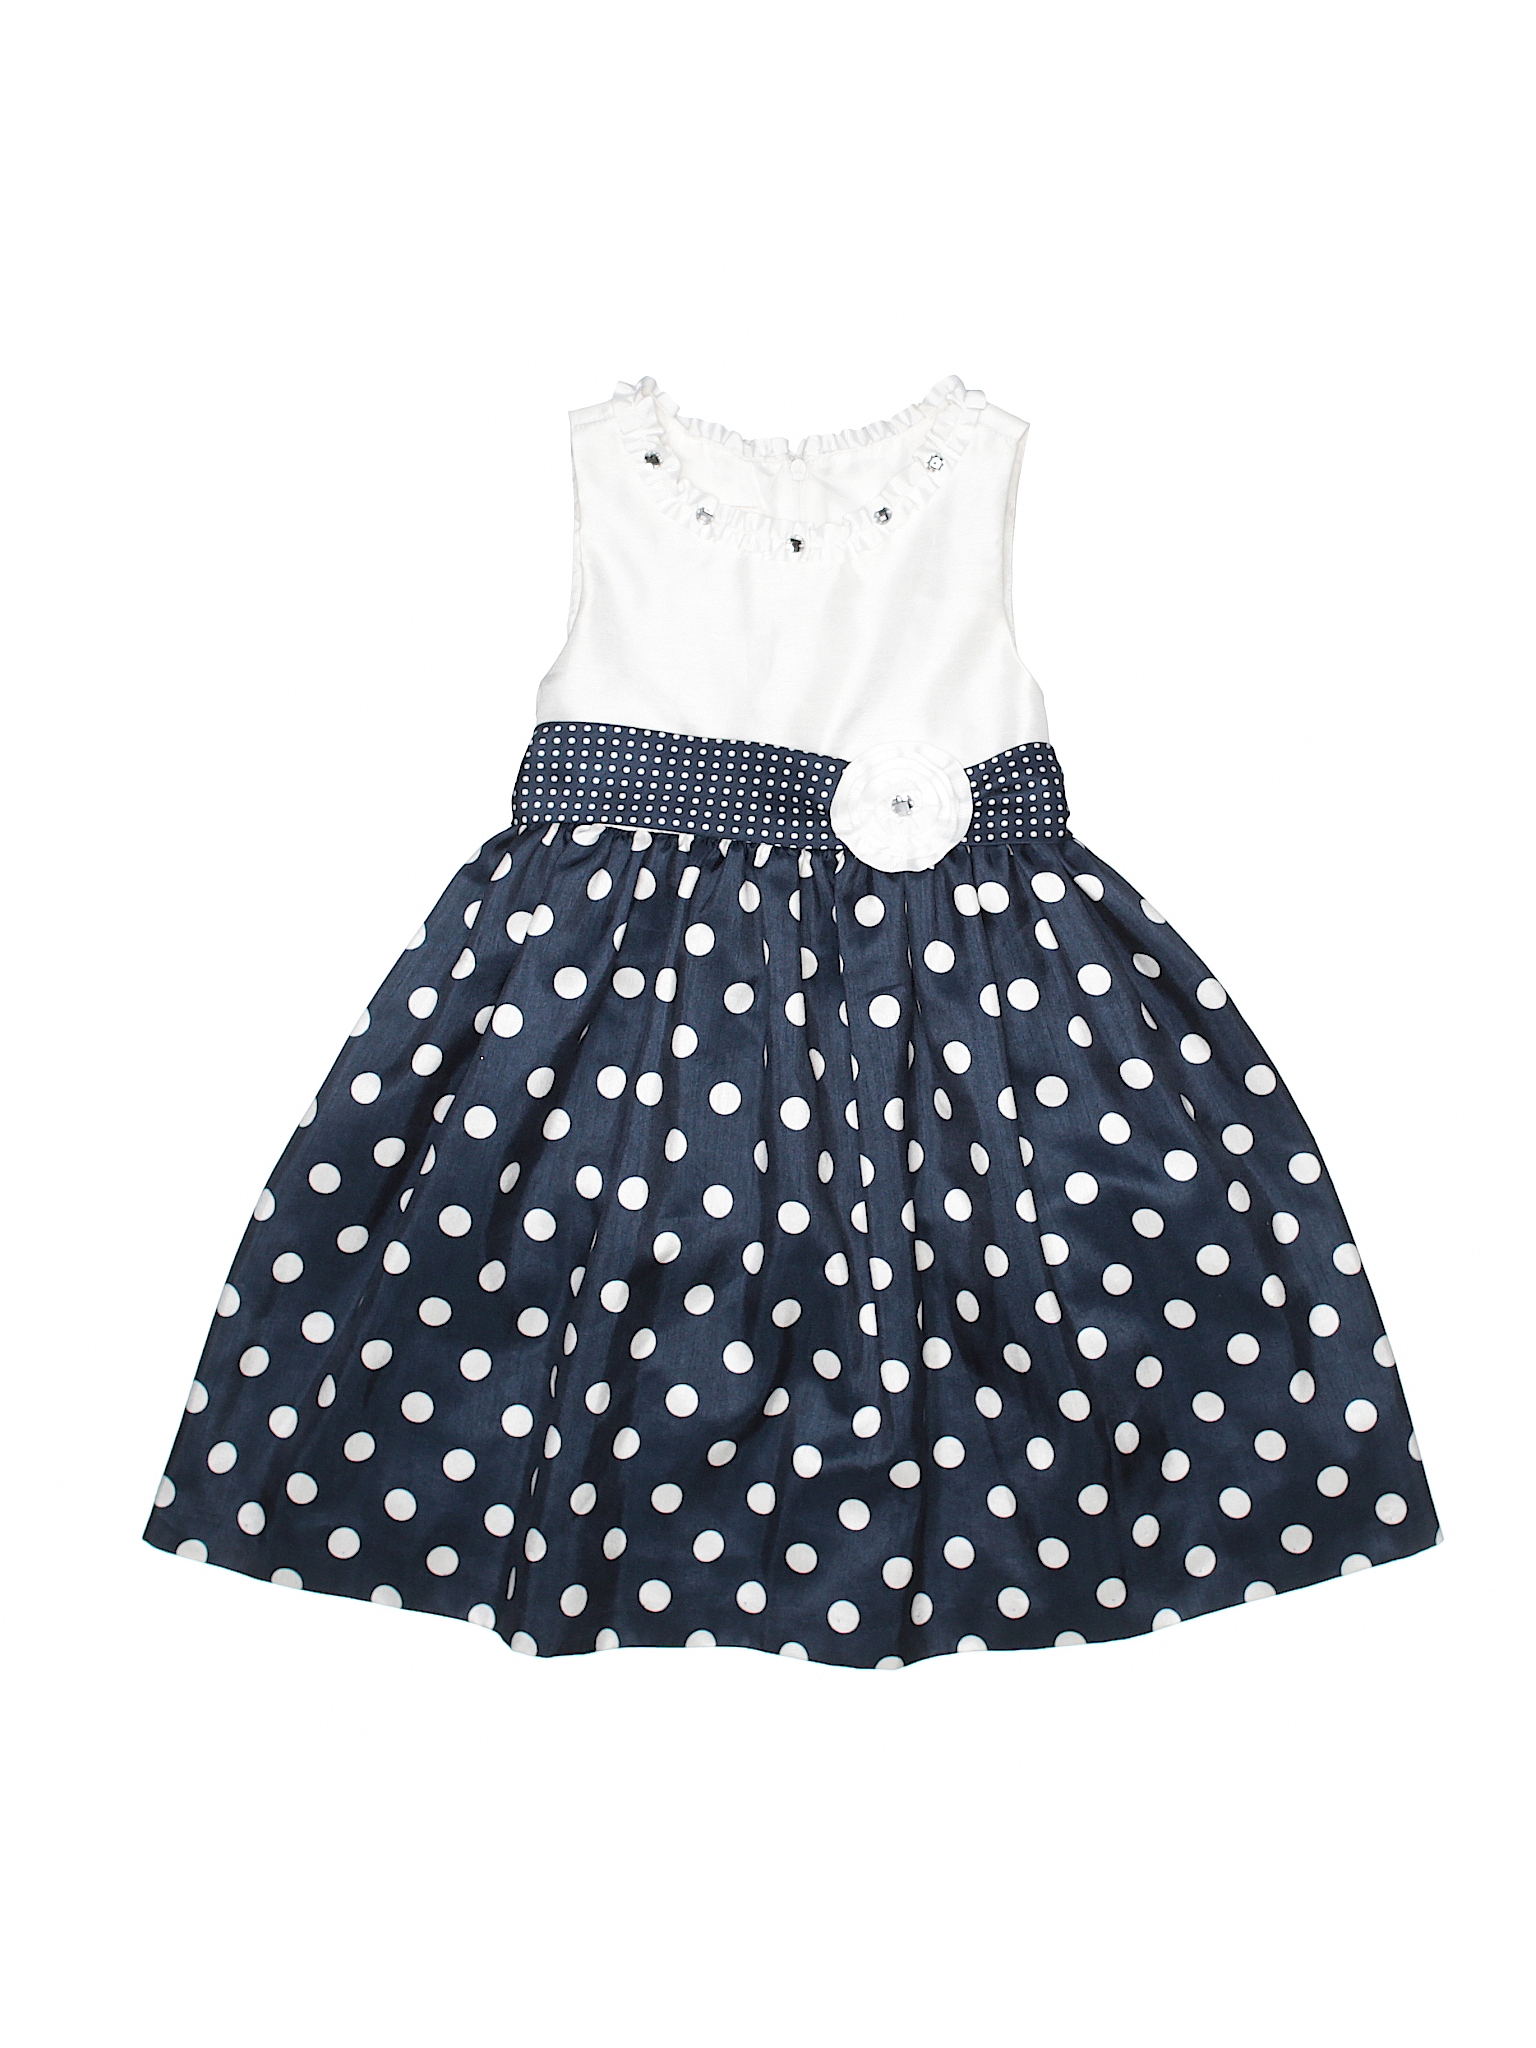 american princess dresses by special occasions